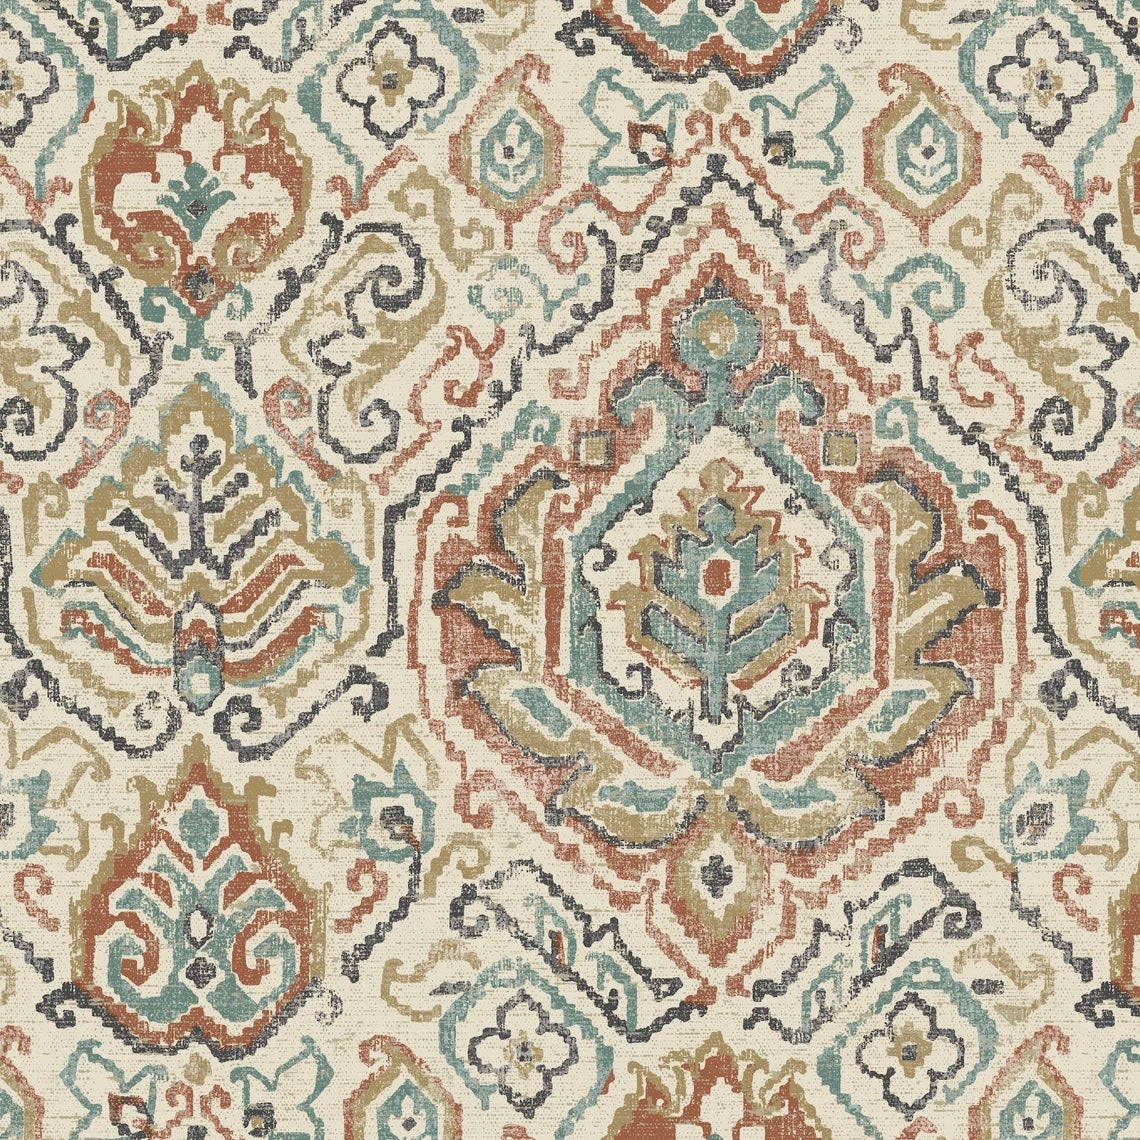 Tailored Crib Skirt in Cathell Clay Medallion Weathered Persian Rug Design- Large Scale